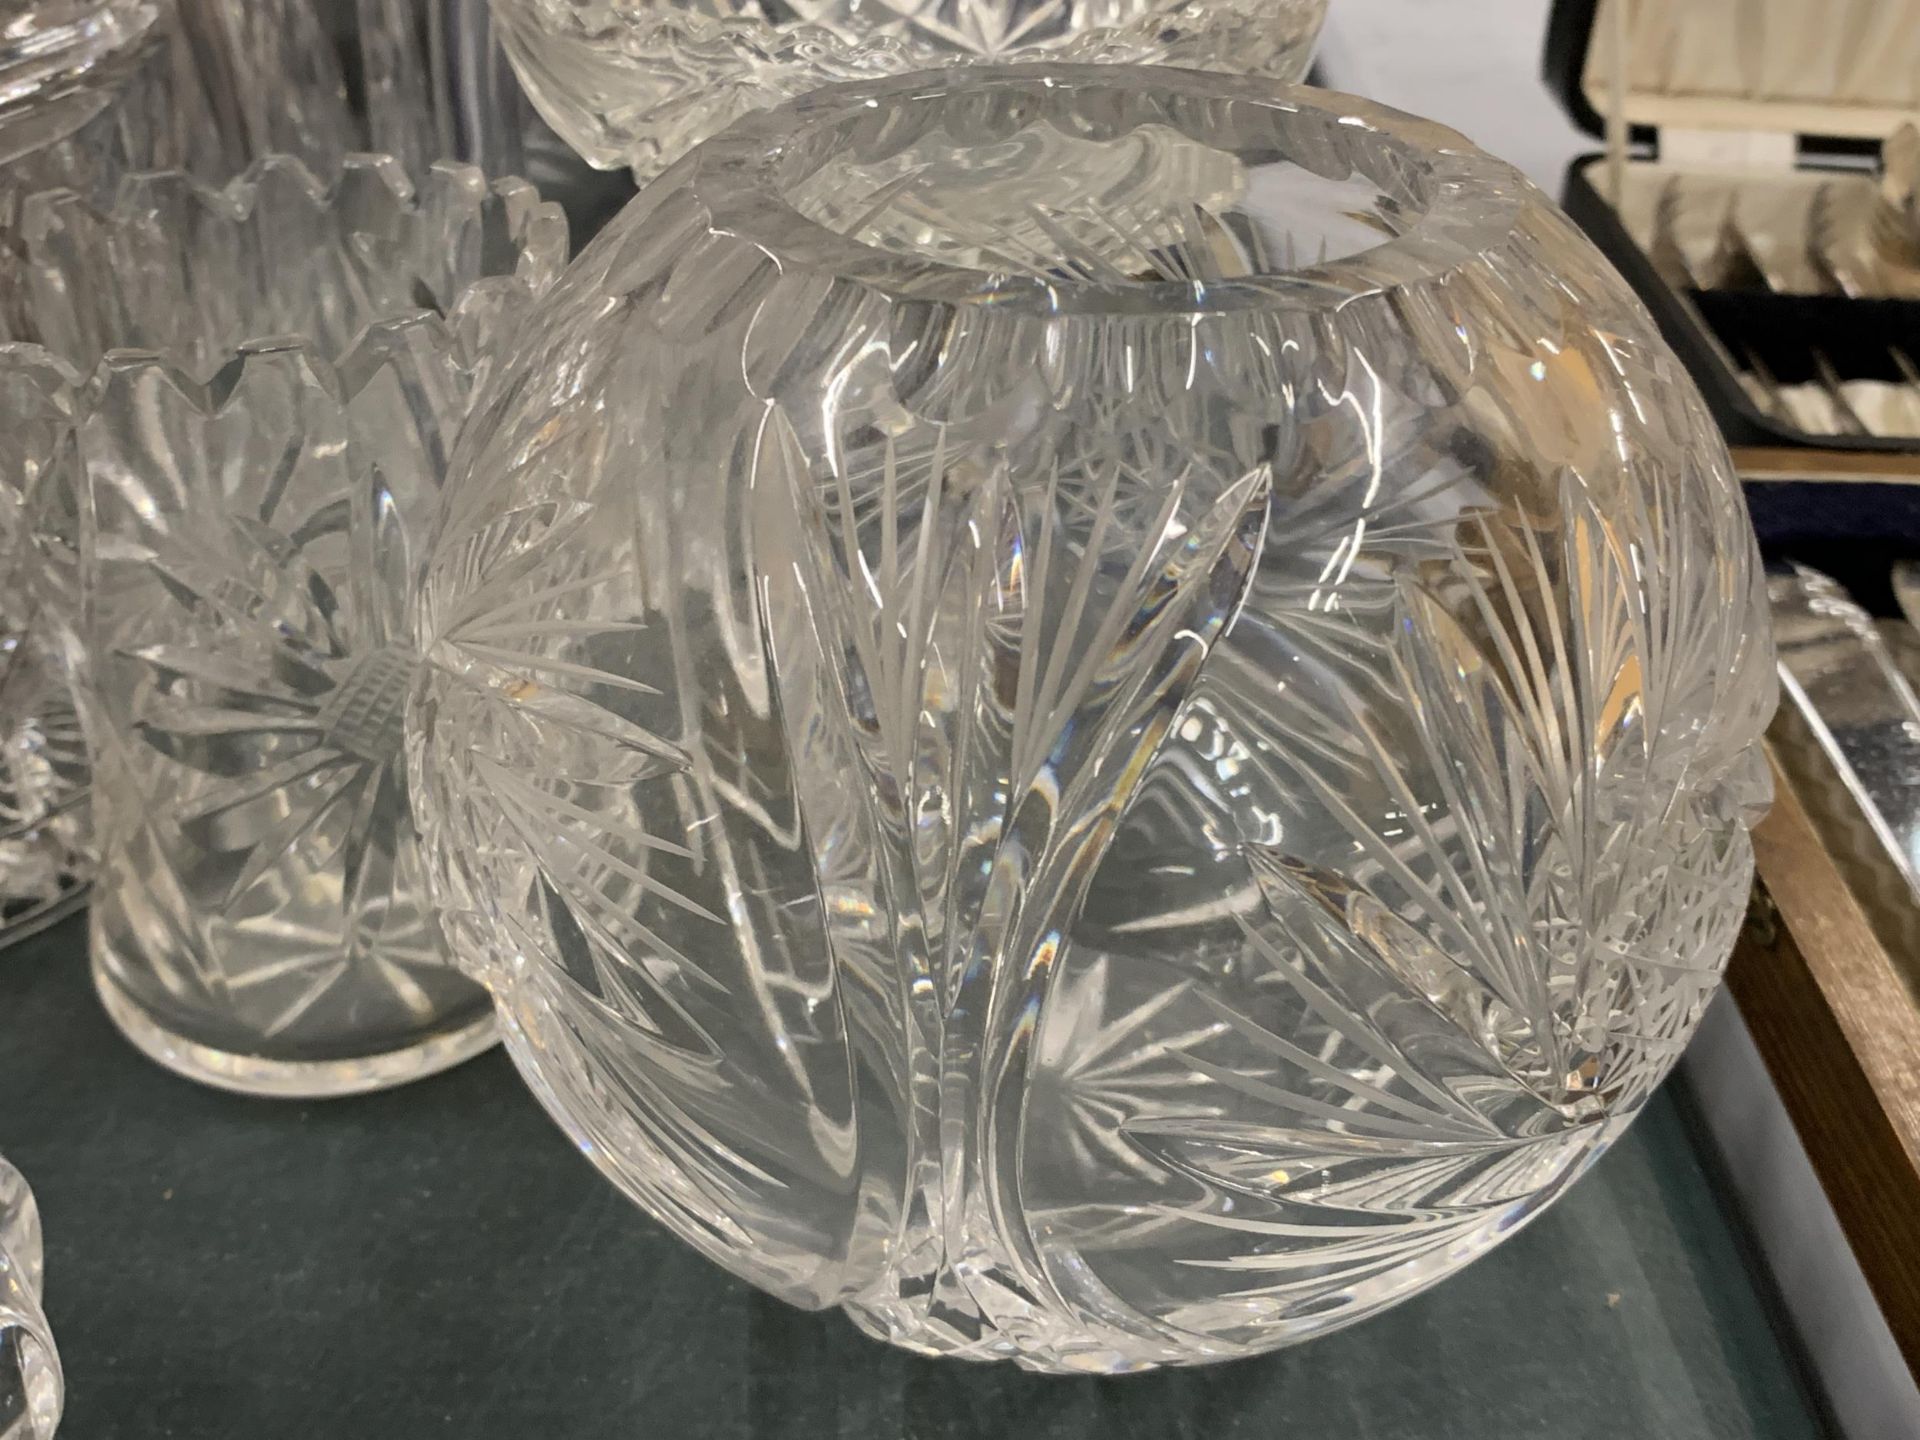 A LARGE QUANTITY OF GLASSWARE TO INCLUDE A MUSHROOM LAMP (NO INNER WORKINGS), VASES, BOWLS, ETC - Image 4 of 4